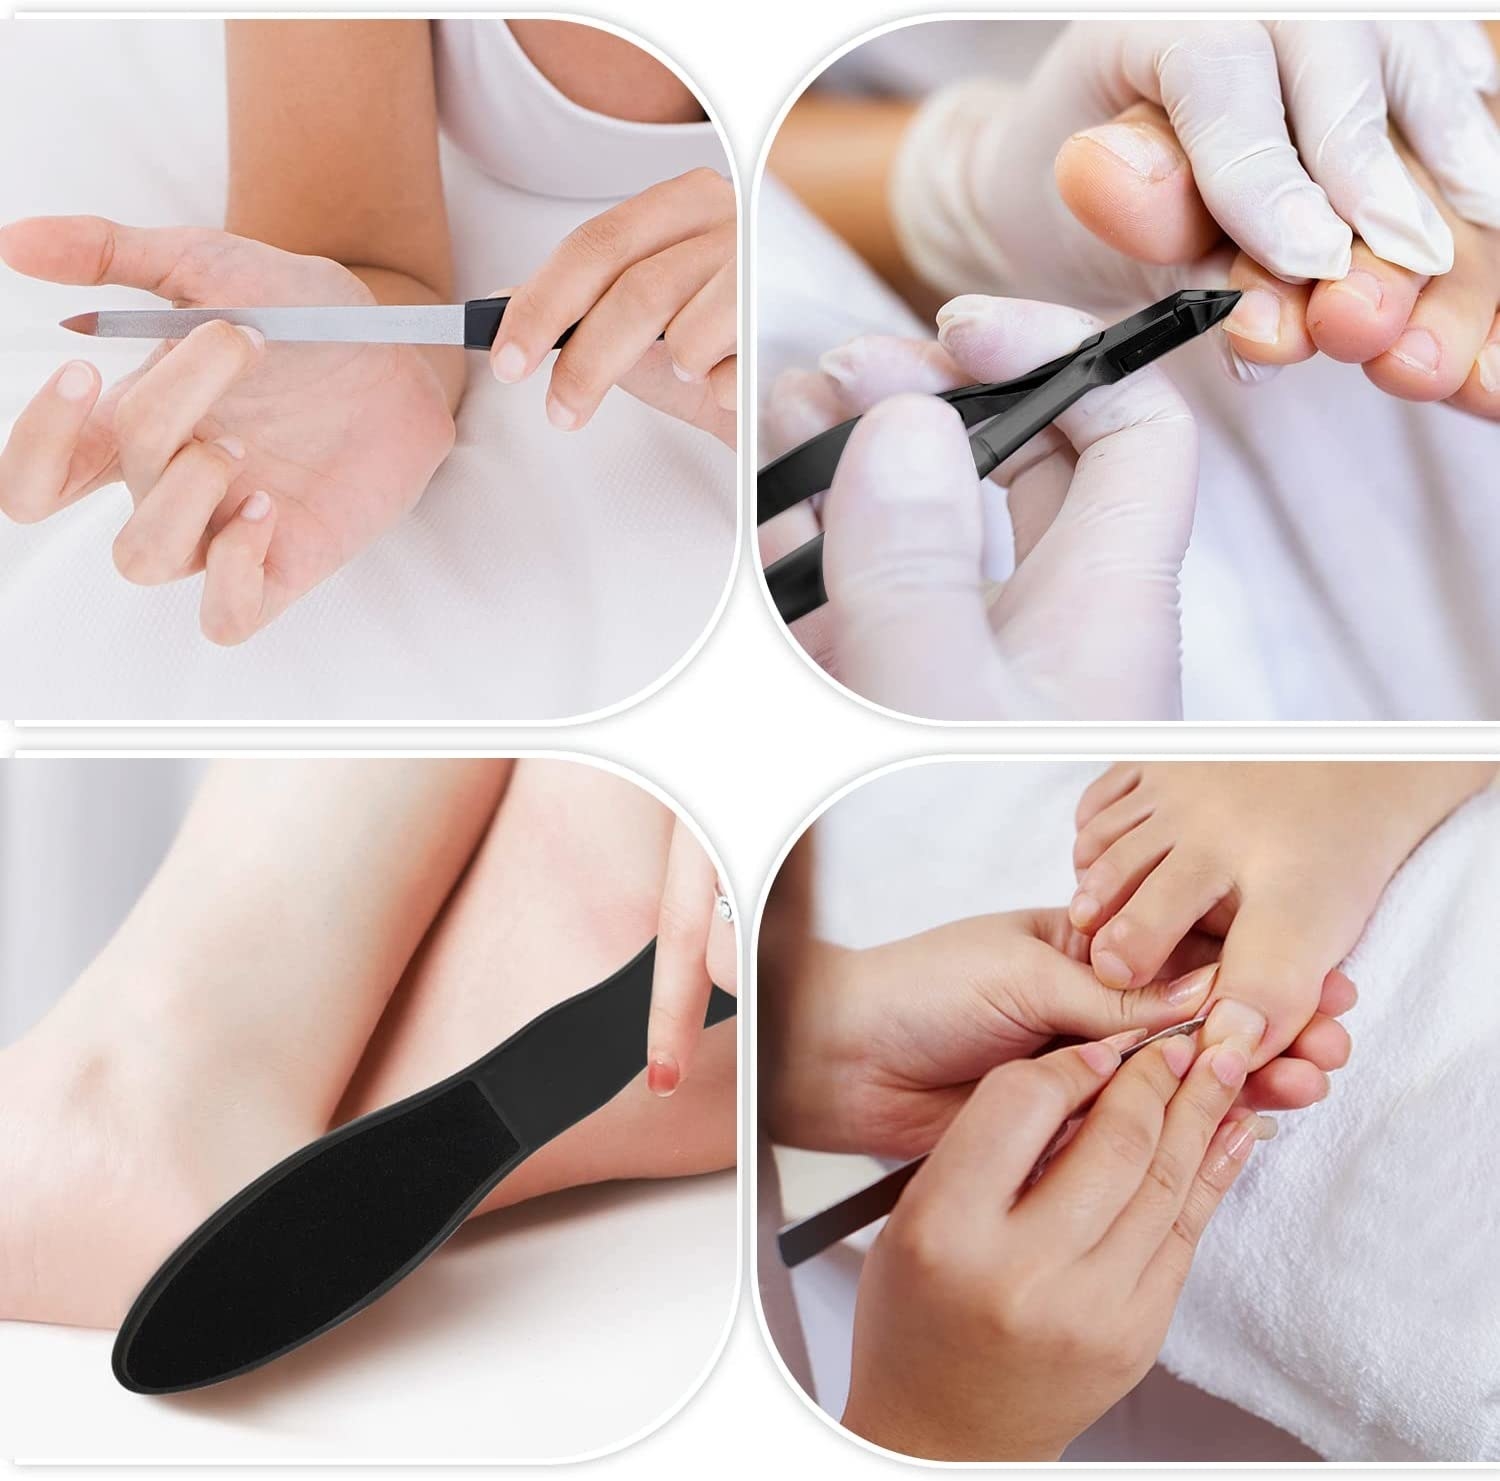 Four-way split image showing the tools being used on various fingers, toenails, and heels